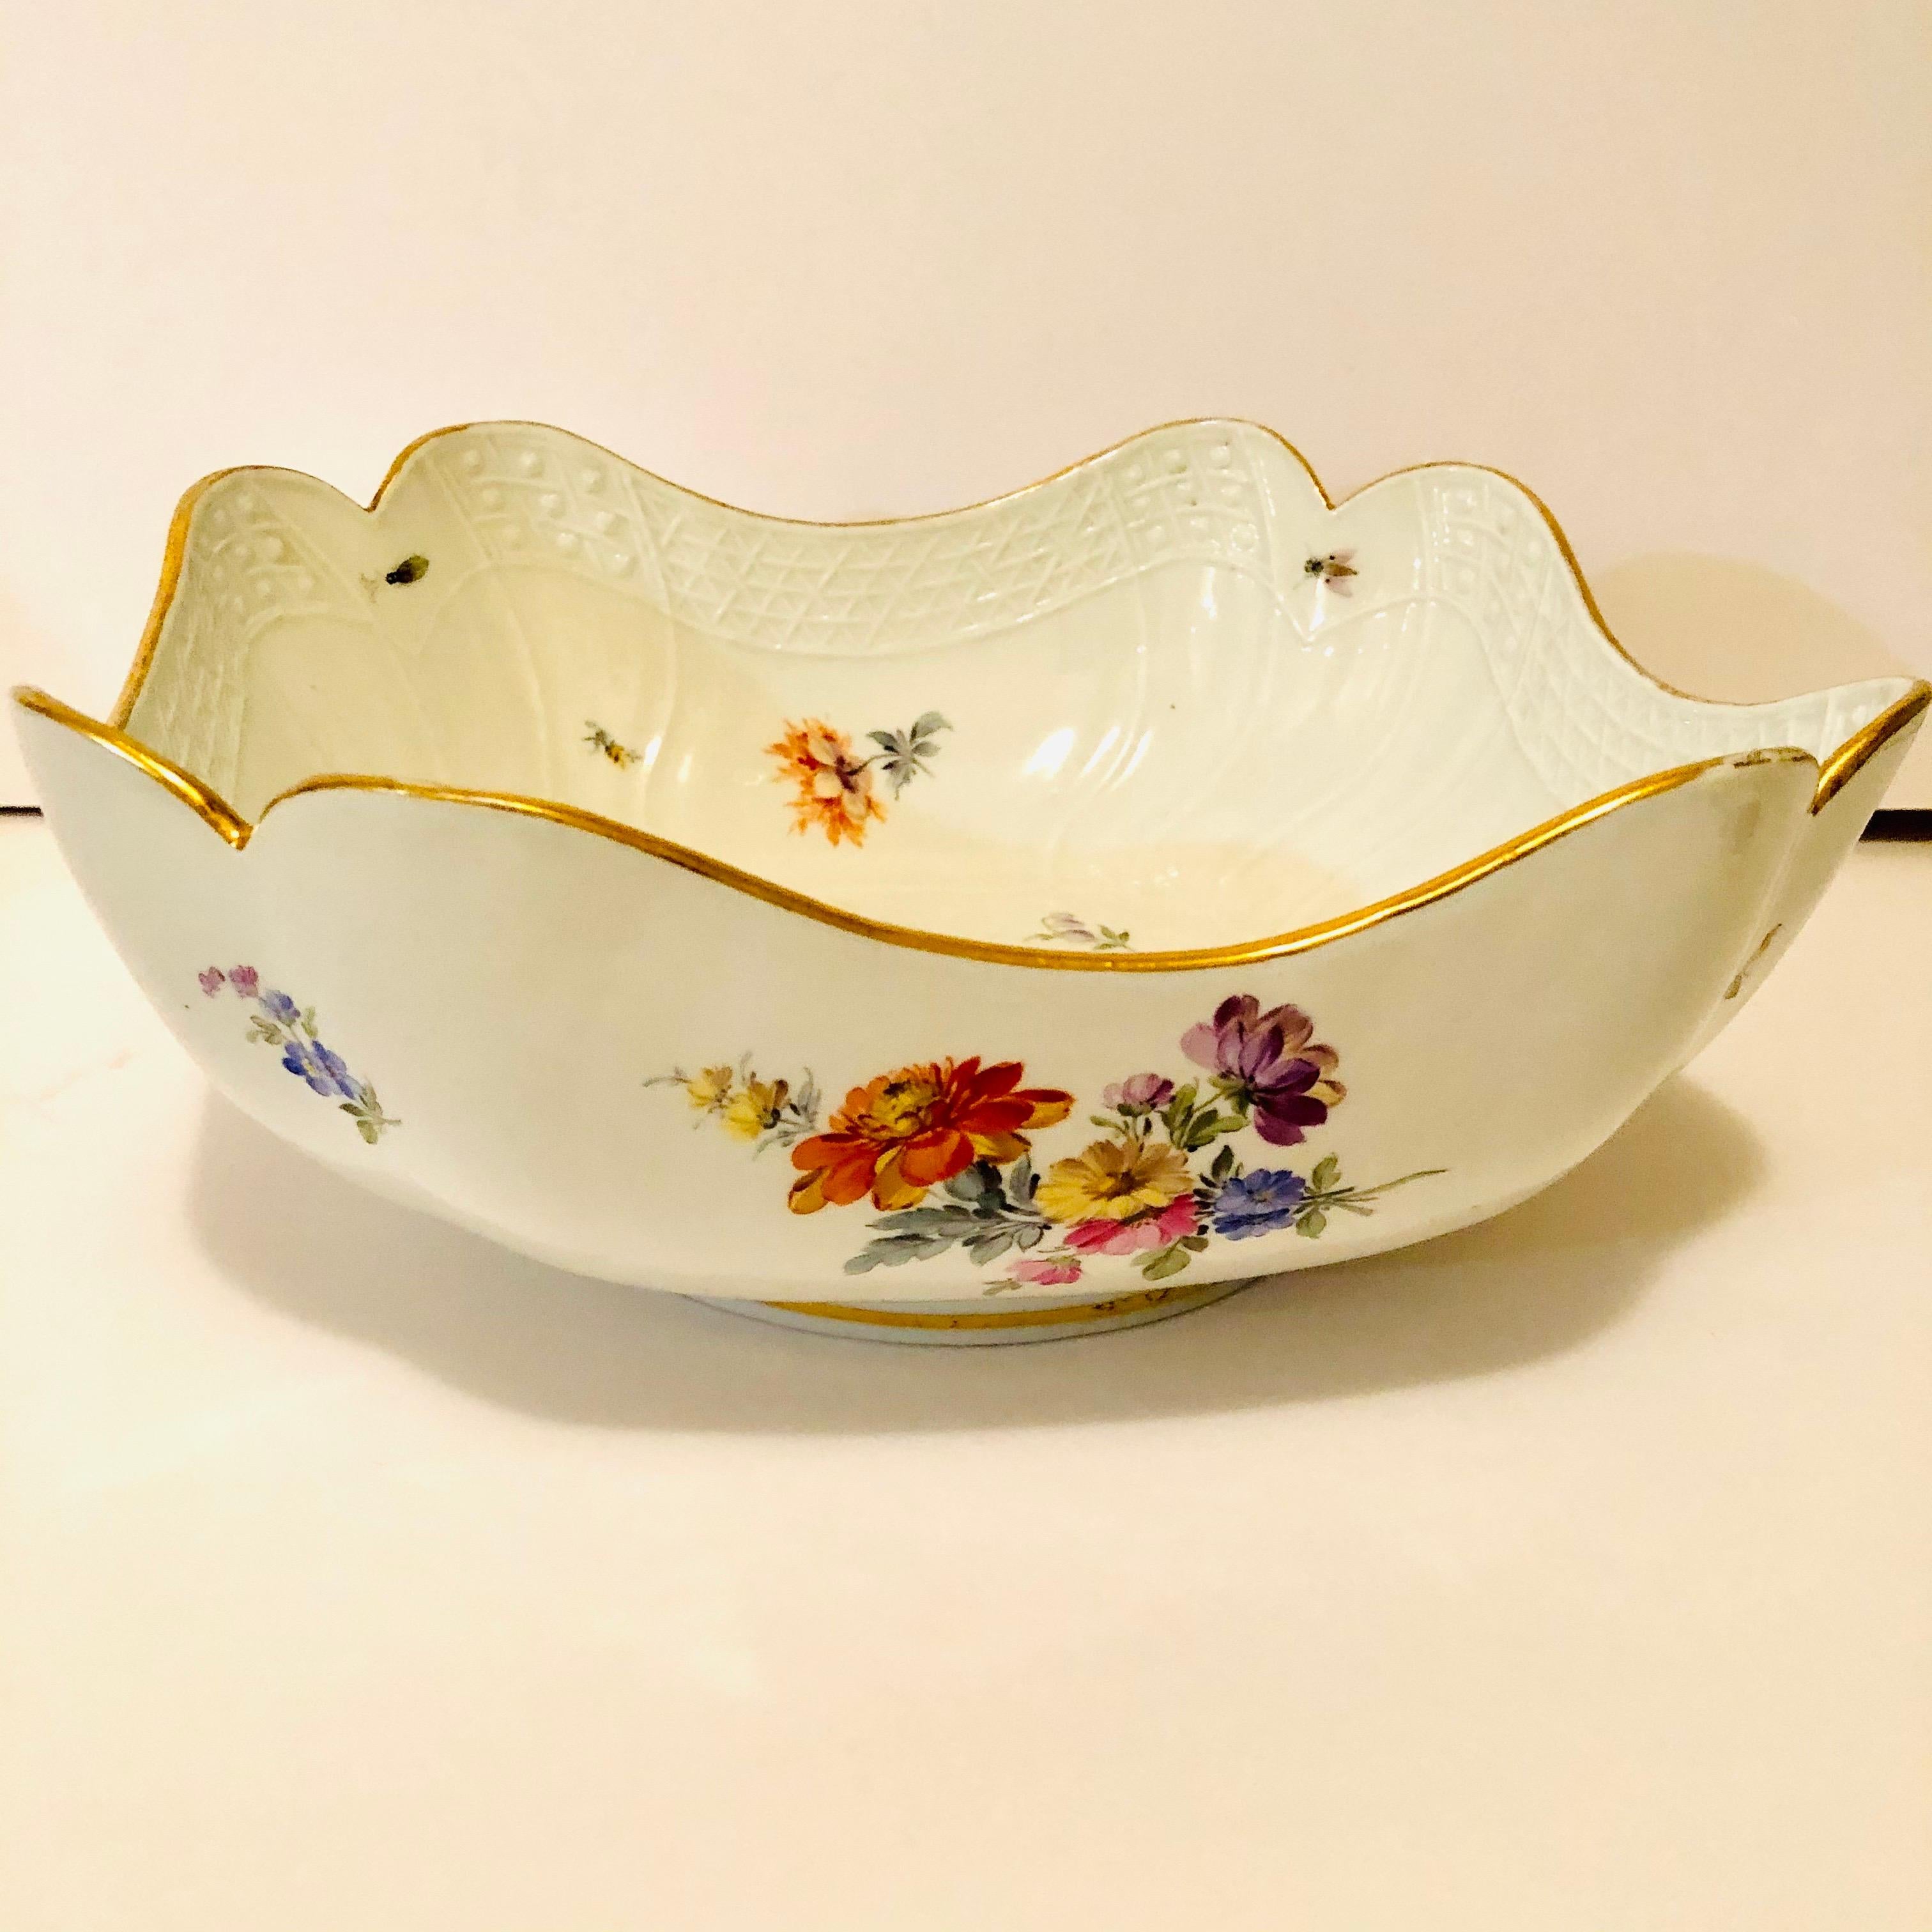 Hand-Painted Meissen Four Cornered Deep Serving Bowl from the 1880s with Five Flower Bouquets